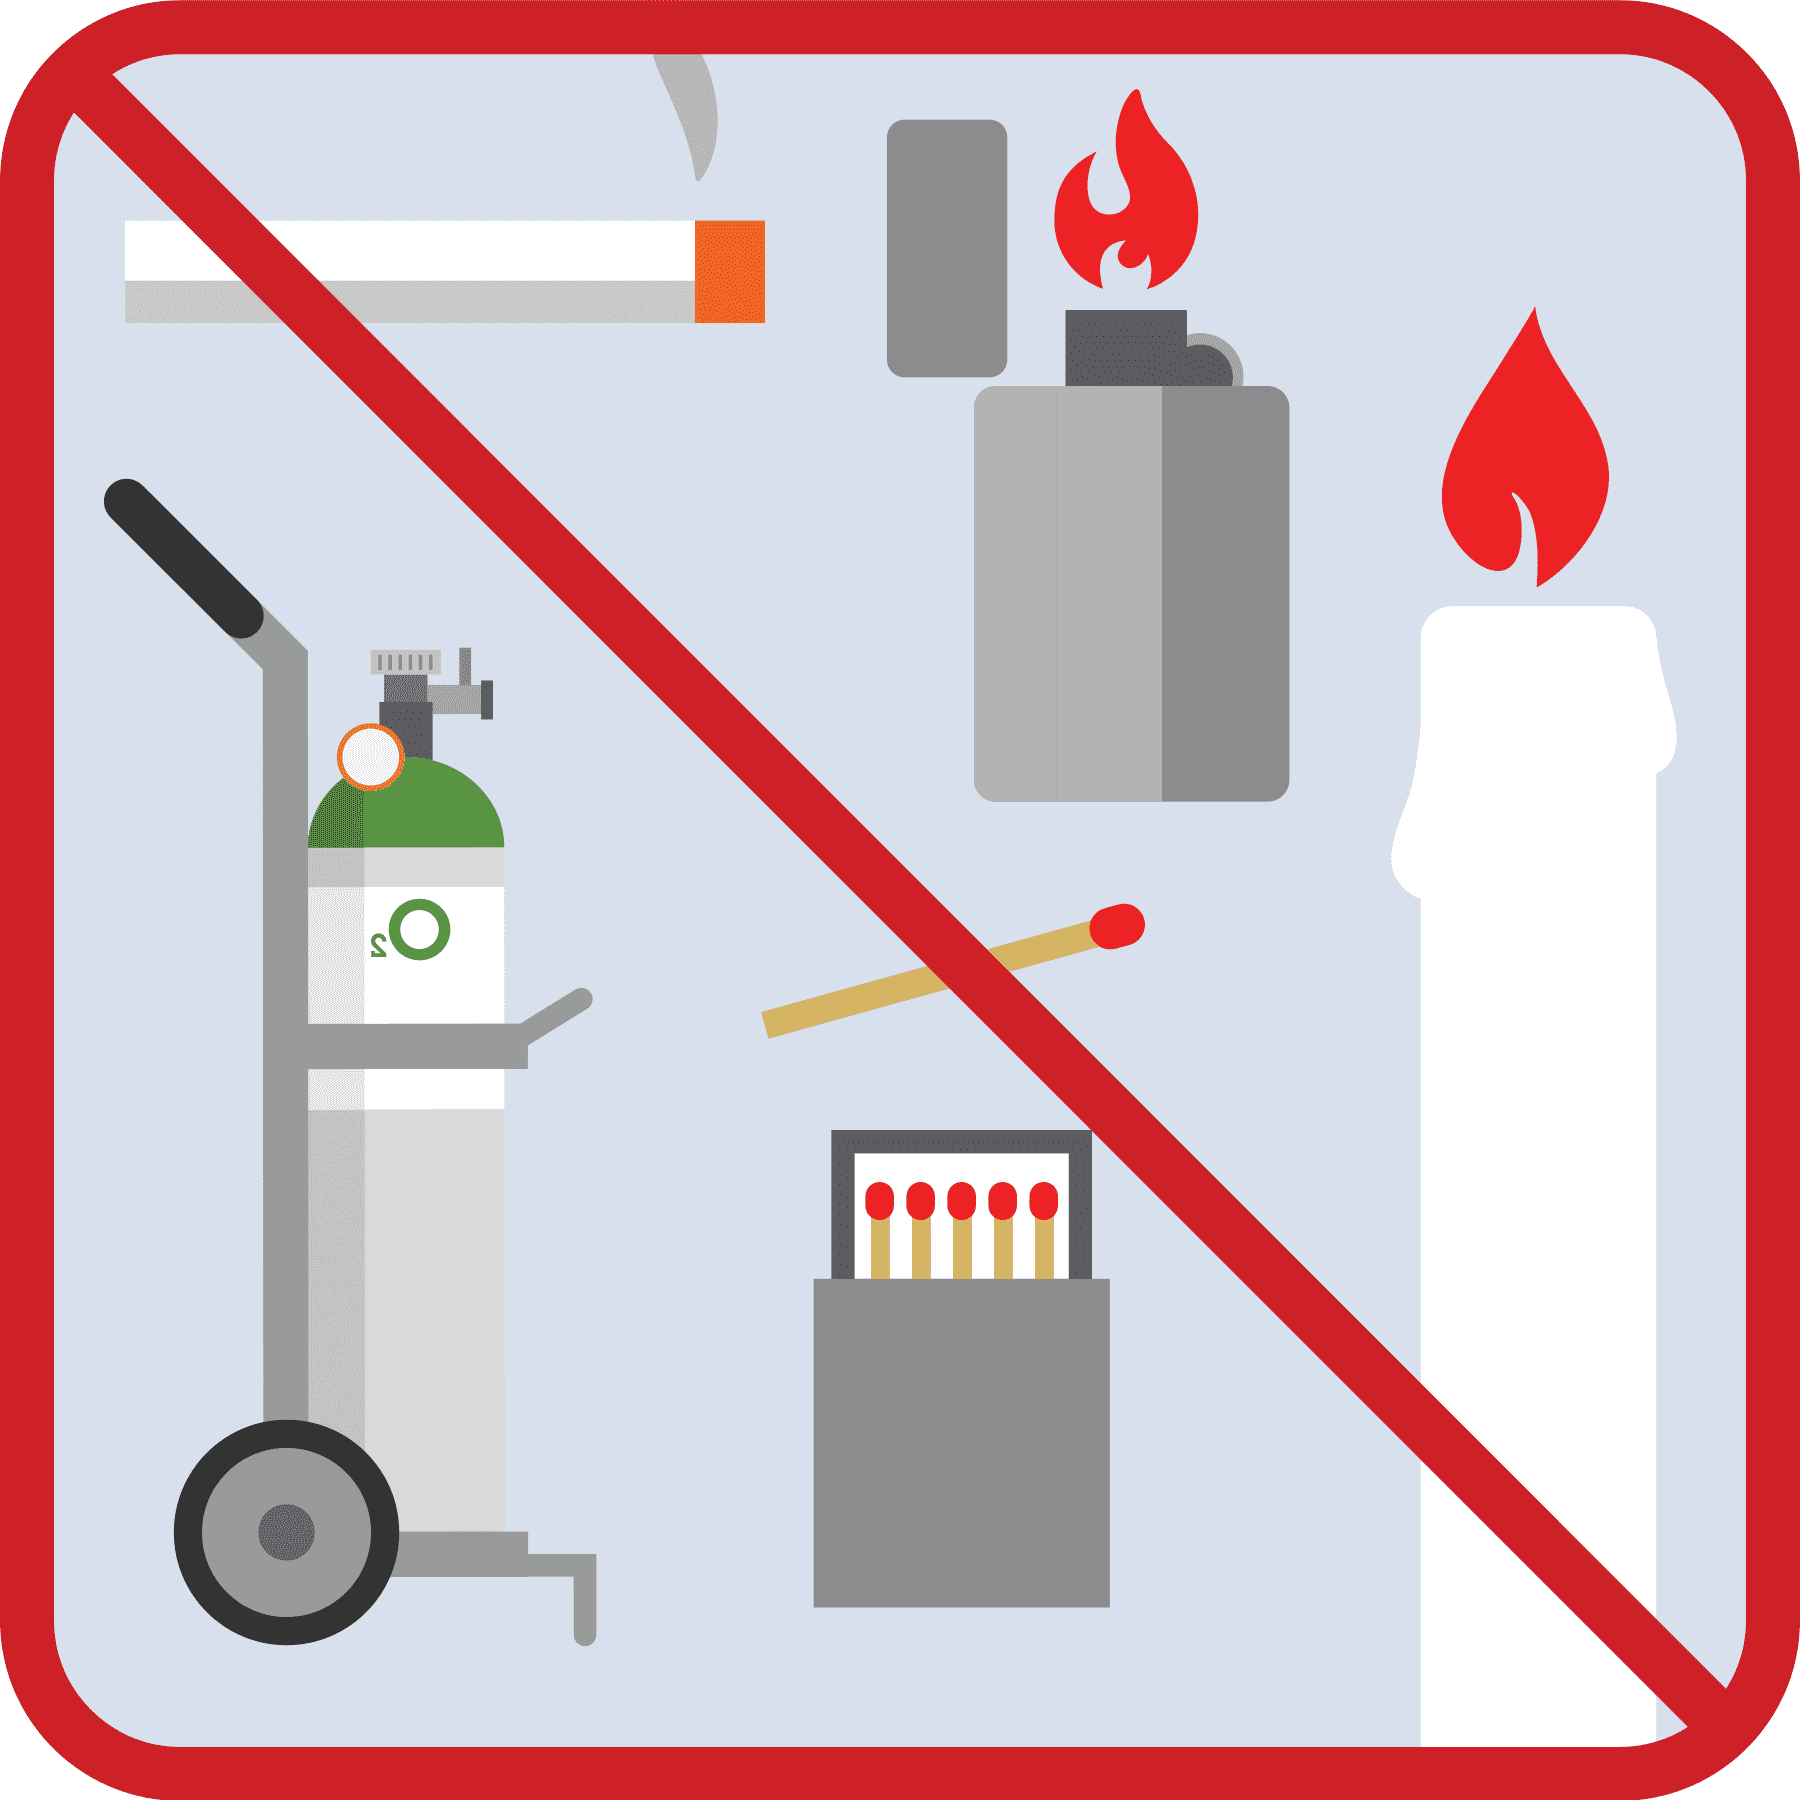 Oxygen tank with cigarettes, lighters, matches and candles with a red x over them.